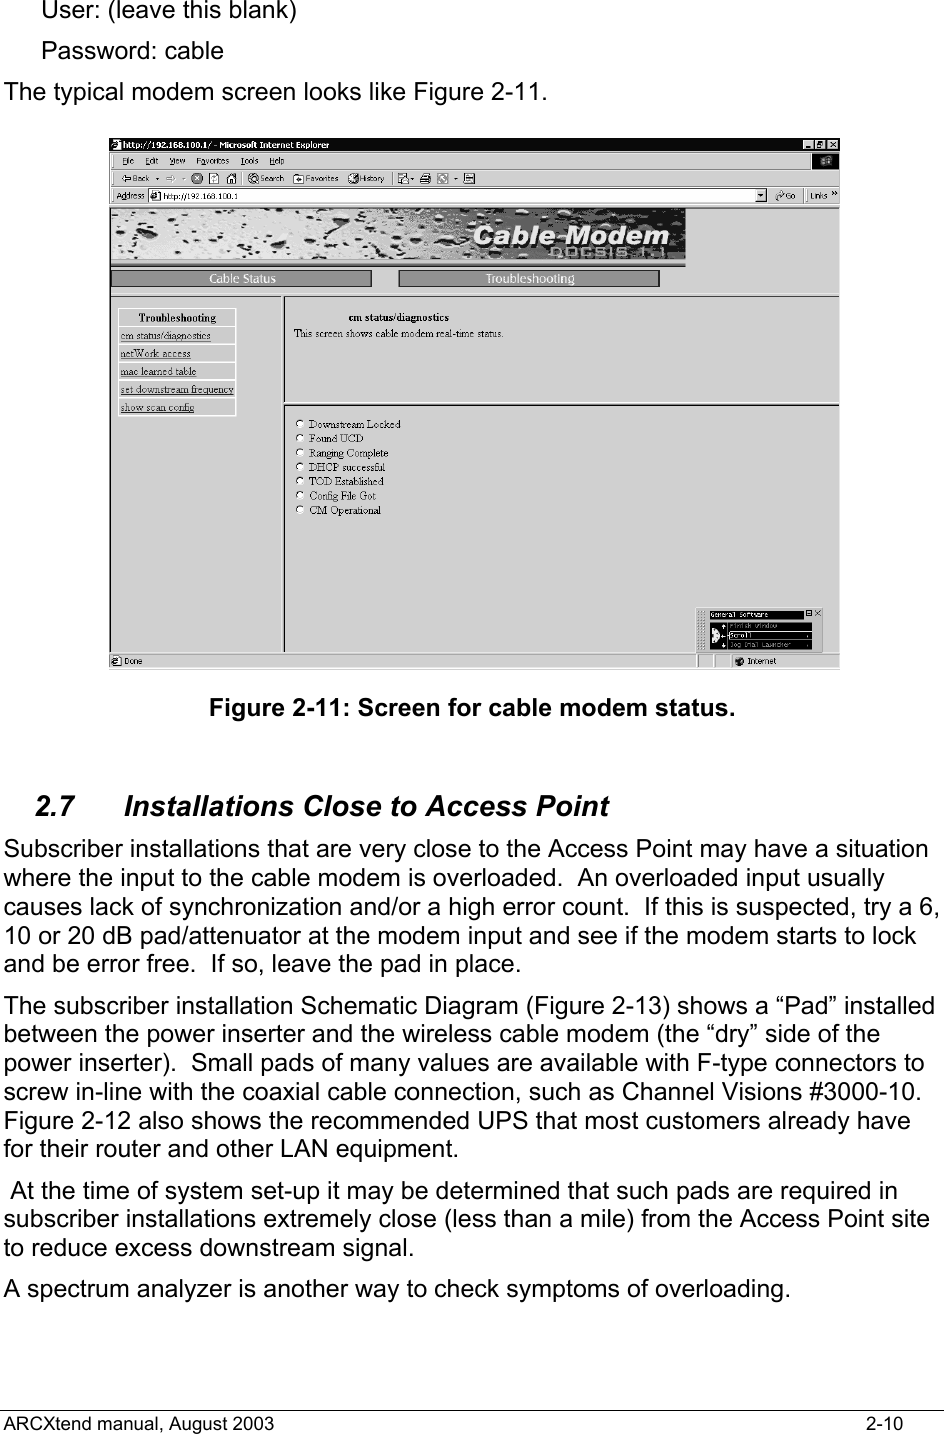  User: (leave this blank) Password: cable The typical modem screen looks like Figure 2-11.  Figure 2-11: Screen for cable modem status.  2.7  Installations Close to Access Point Subscriber installations that are very close to the Access Point may have a situation where the input to the cable modem is overloaded.  An overloaded input usually causes lack of synchronization and/or a high error count.  If this is suspected, try a 6, 10 or 20 dB pad/attenuator at the modem input and see if the modem starts to lock and be error free.  If so, leave the pad in place. The subscriber installation Schematic Diagram (Figure 2-13) shows a “Pad” installed between the power inserter and the wireless cable modem (the “dry” side of the power inserter).  Small pads of many values are available with F-type connectors to screw in-line with the coaxial cable connection, such as Channel Visions #3000-10.   Figure 2-12 also shows the recommended UPS that most customers already have for their router and other LAN equipment.  At the time of system set-up it may be determined that such pads are required in subscriber installations extremely close (less than a mile) from the Access Point site to reduce excess downstream signal. A spectrum analyzer is another way to check symptoms of overloading. ARCXtend manual, August 2003    2-10 